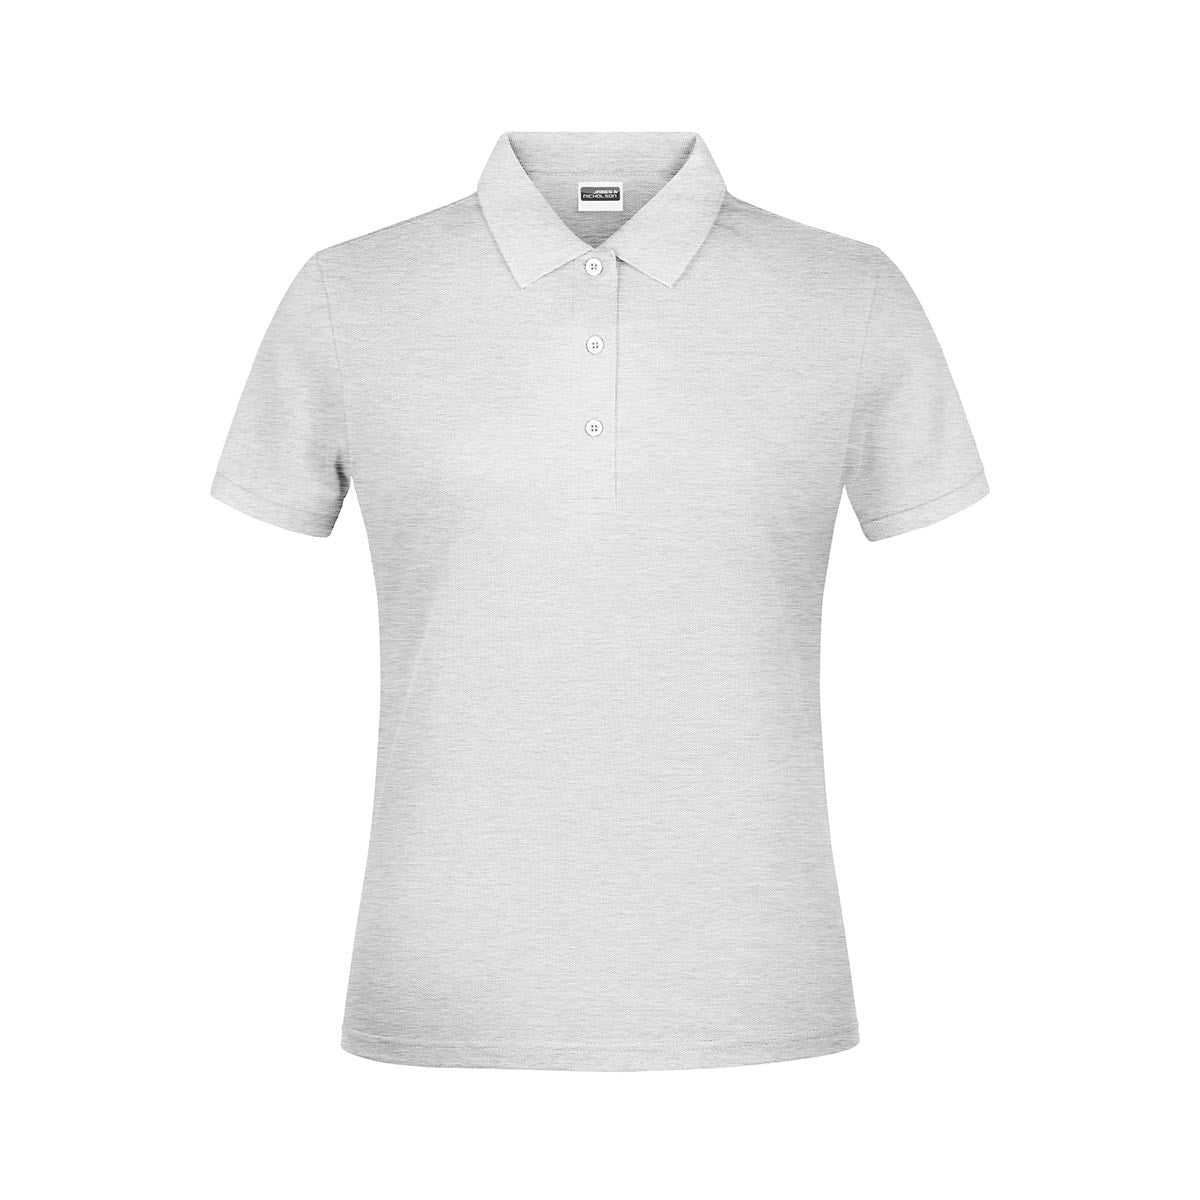 Value Polo-Shirt (Women) (Muster)